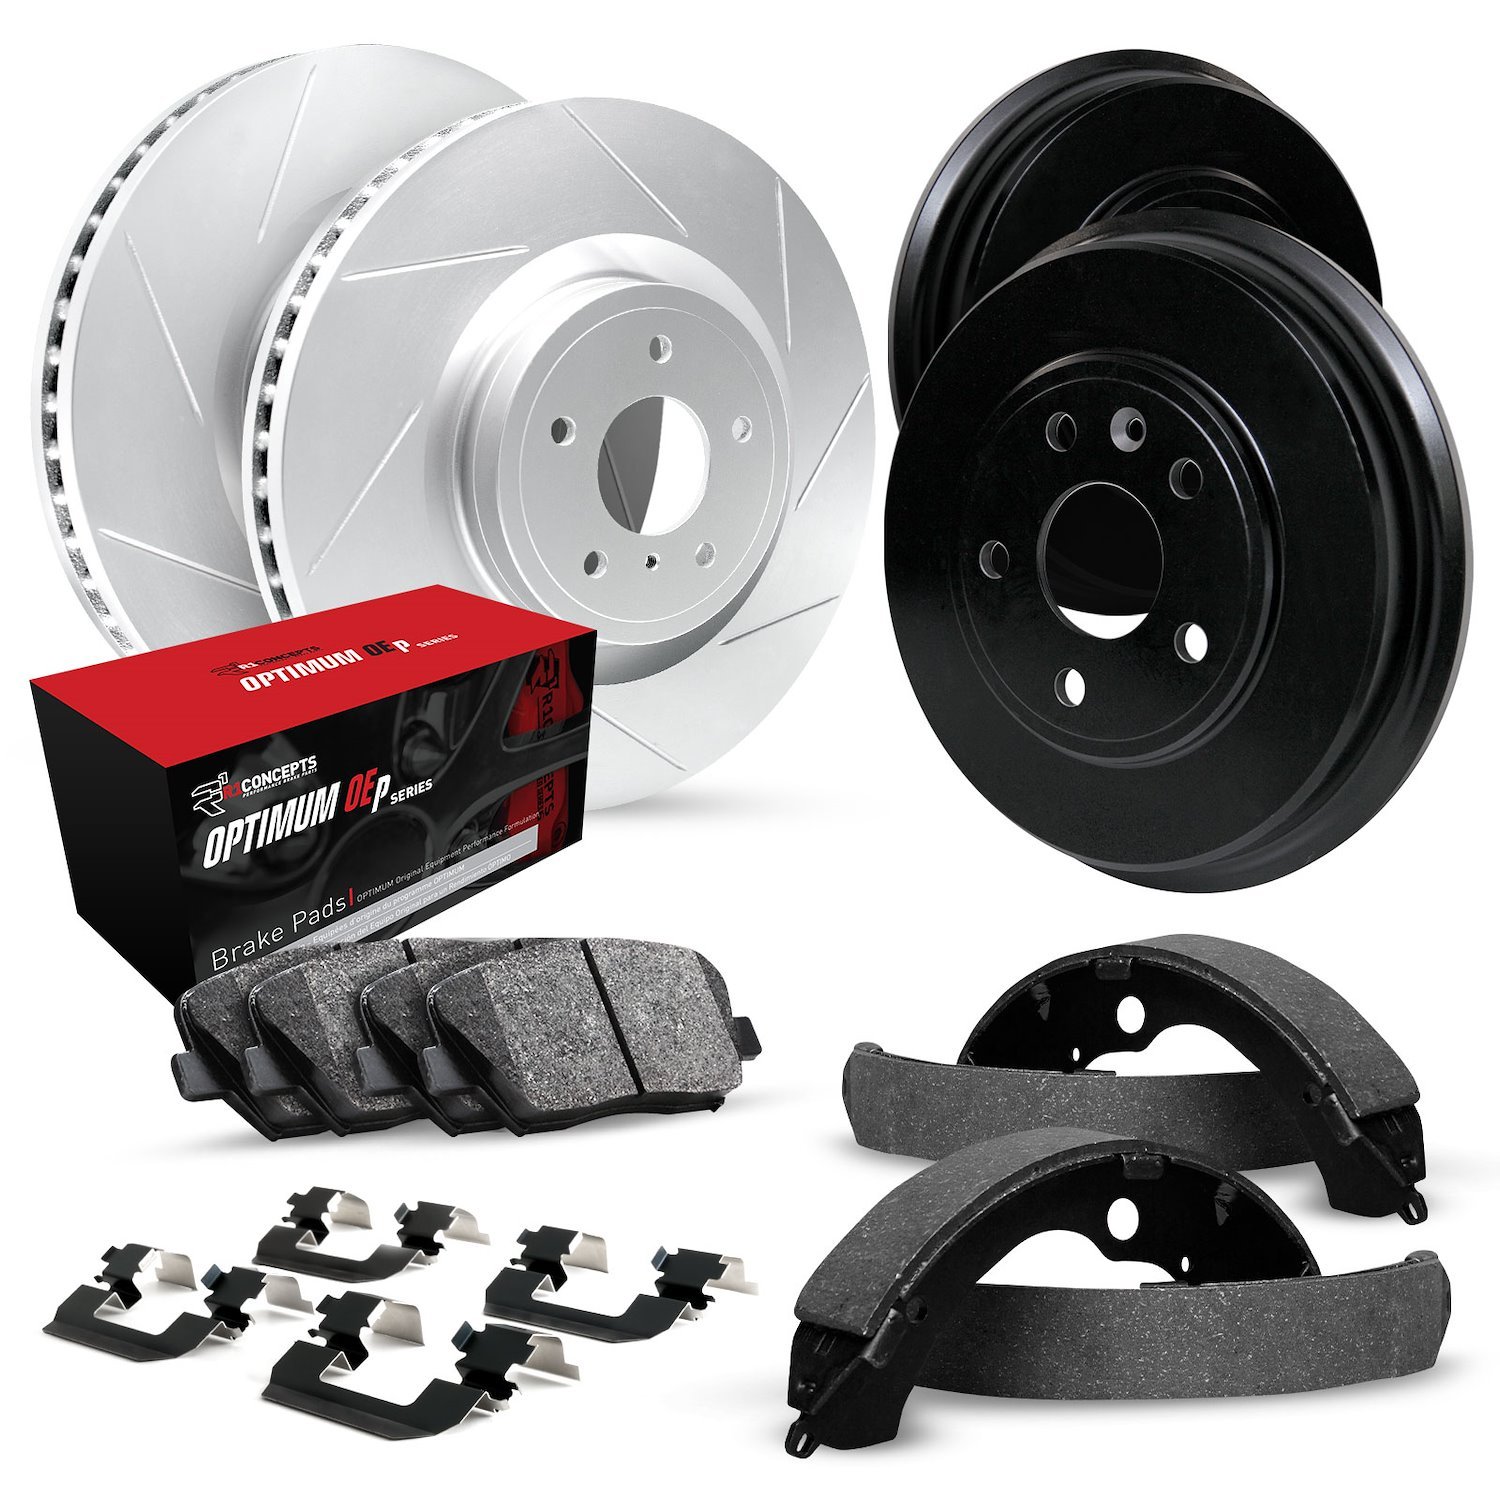 GEO-Carbon Slotted Brake Rotor & Drum Set w/Optimum OE Pads, Shoes, & Hardware, 1981-1984 GM, Position: Front & Rear